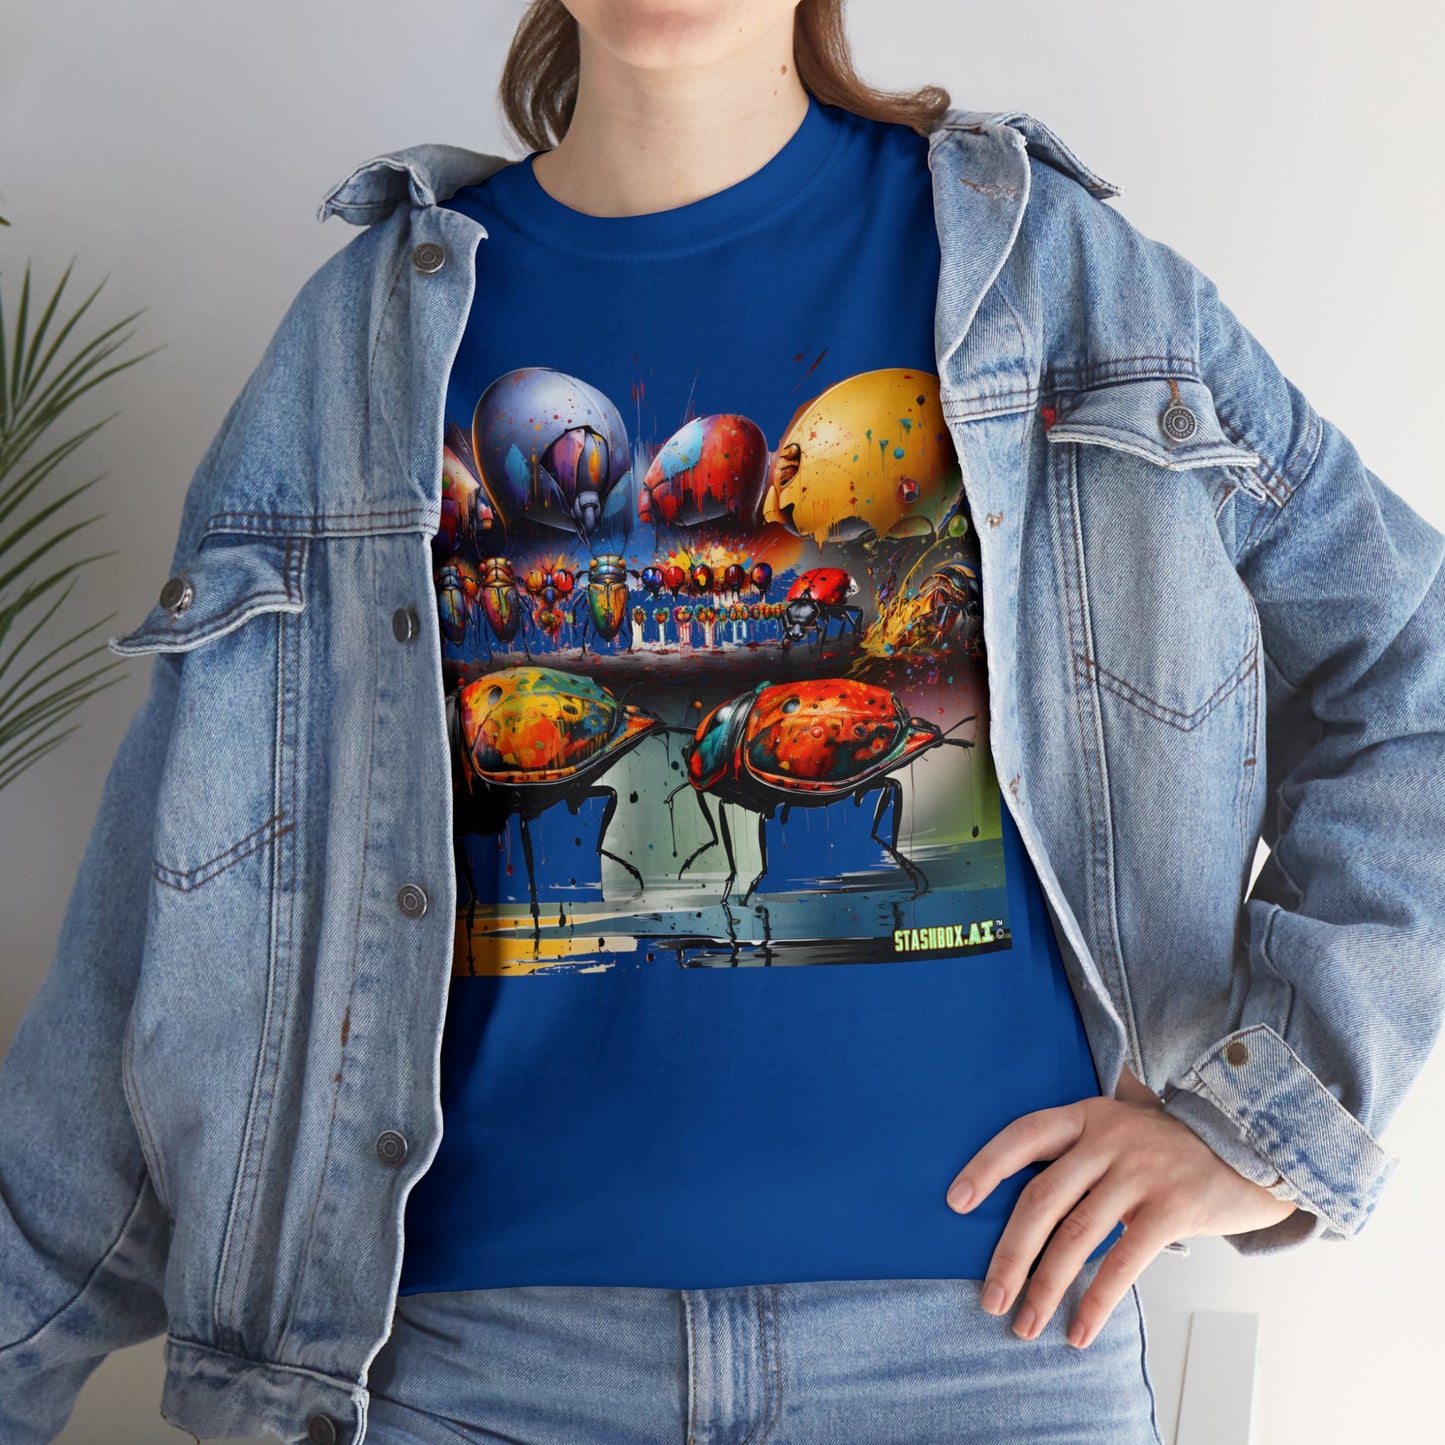 Unisex Adult Size Heavy Cotton Tee Colorful Bugs 002 T-Shirt